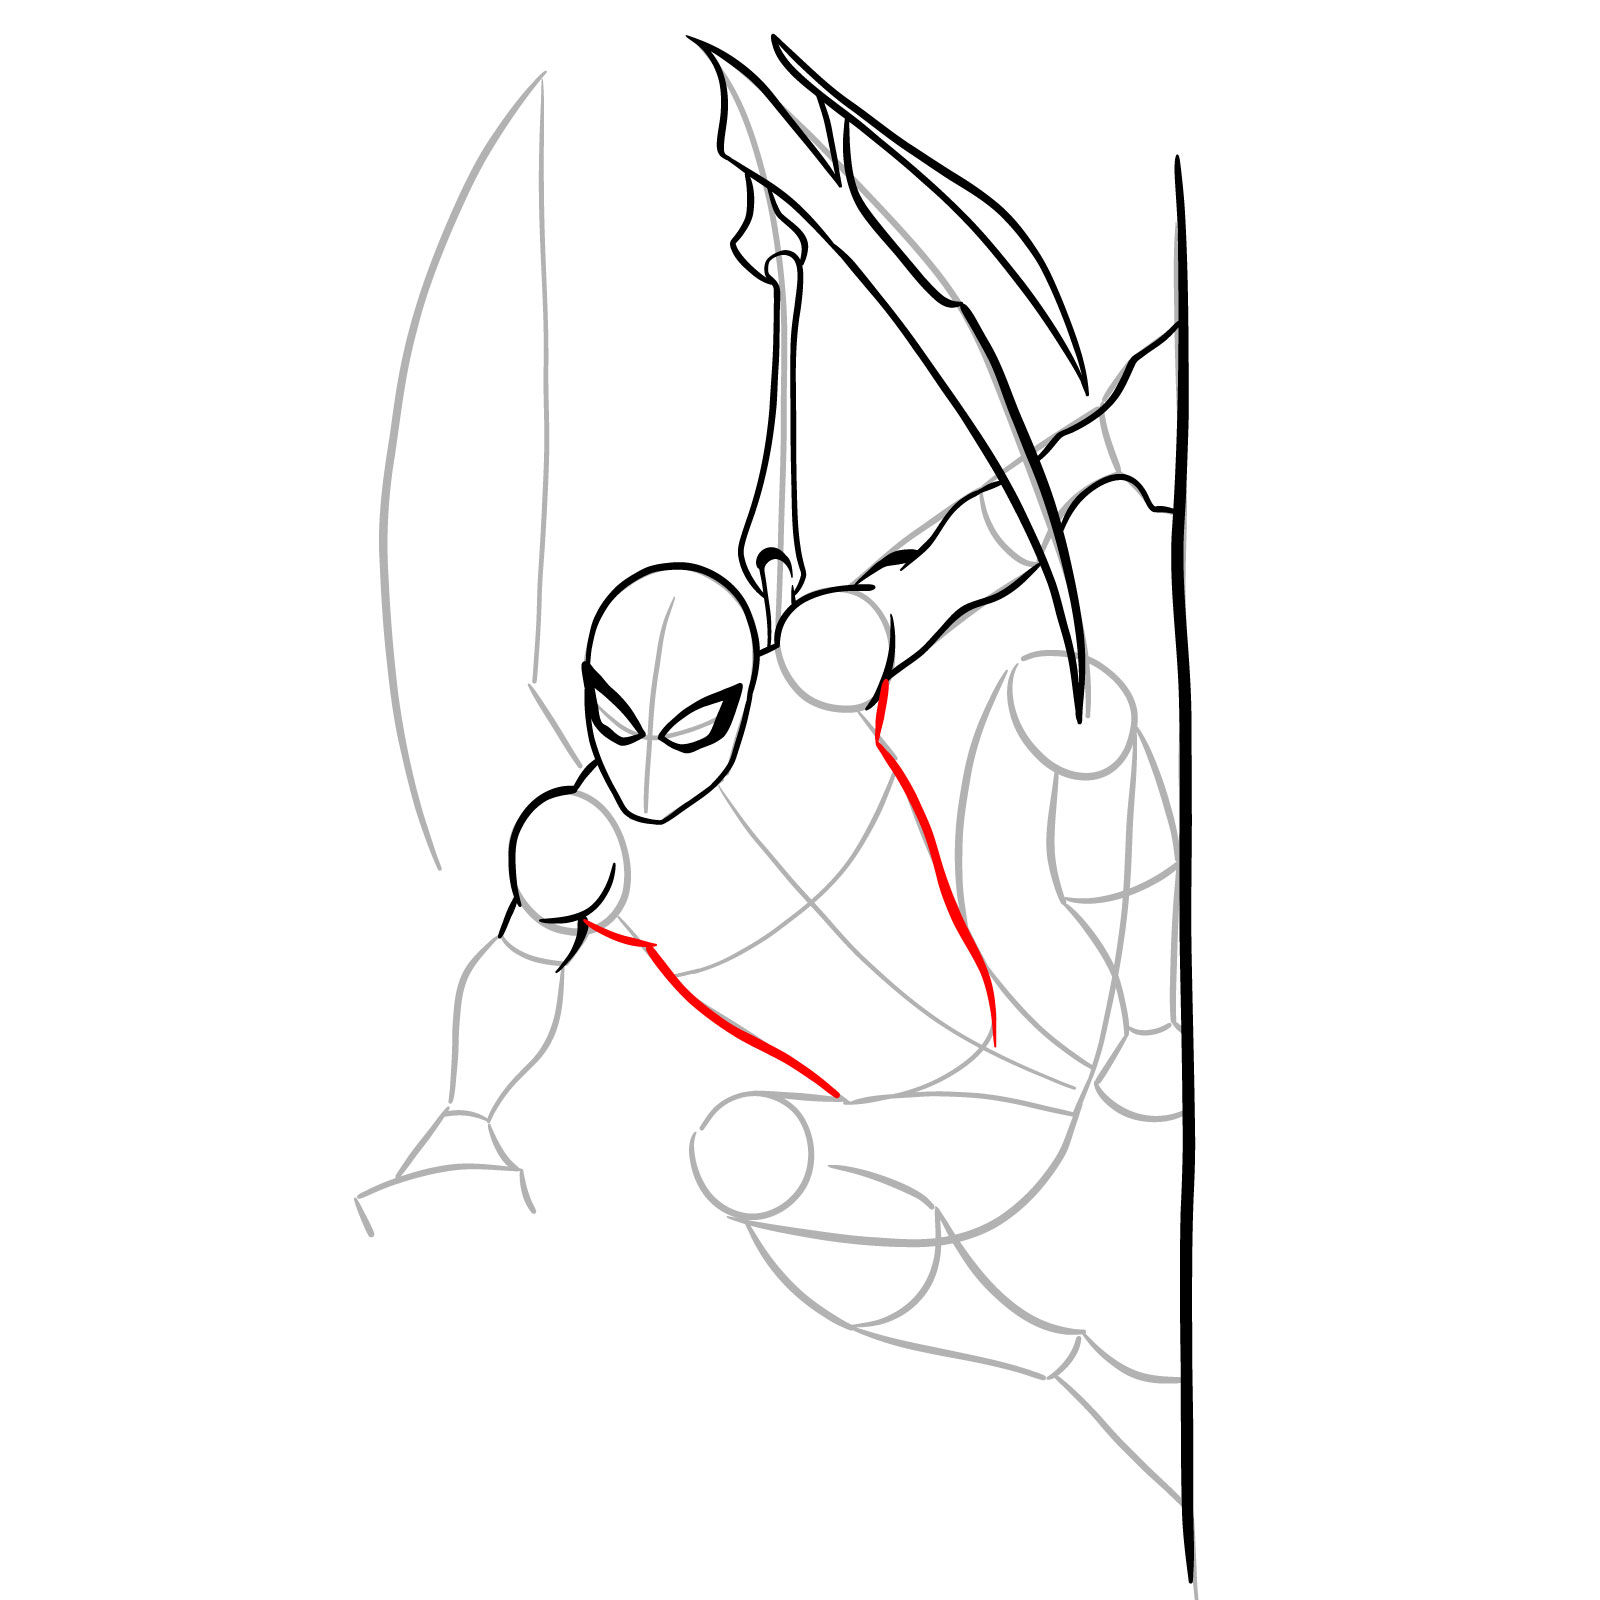 How to draw The Superior Spider-Man - step 16